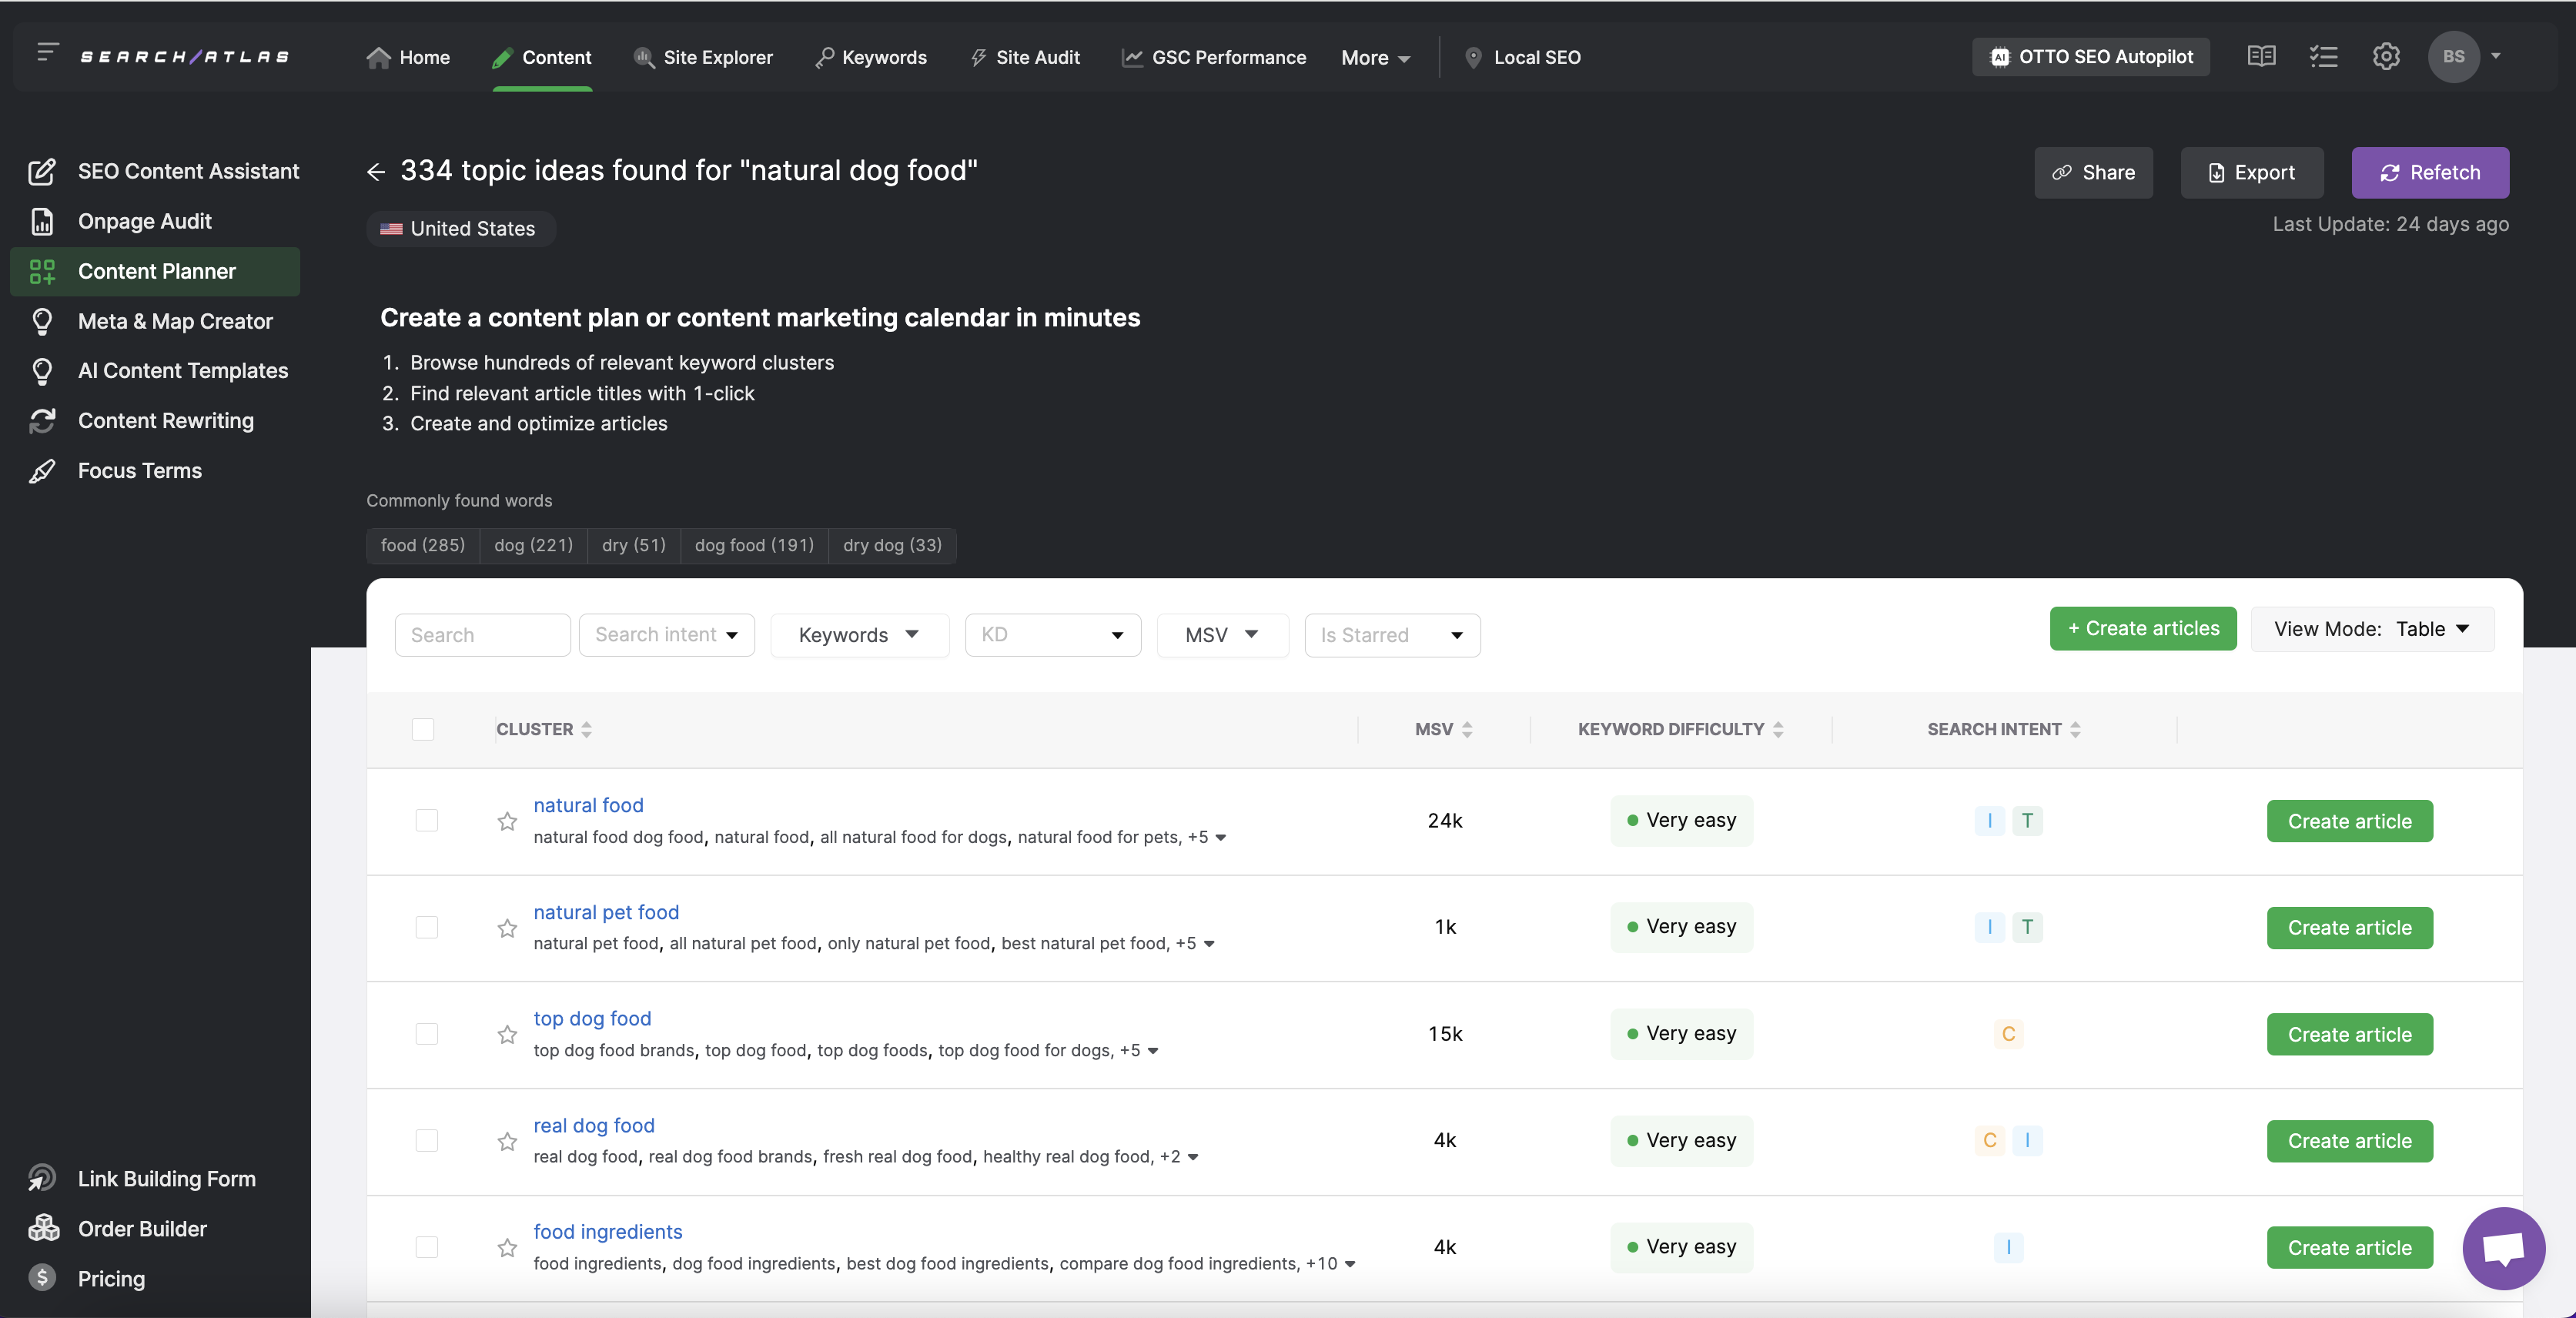 A screenshot of the Slack dashboard displaying the content plan for SEO.